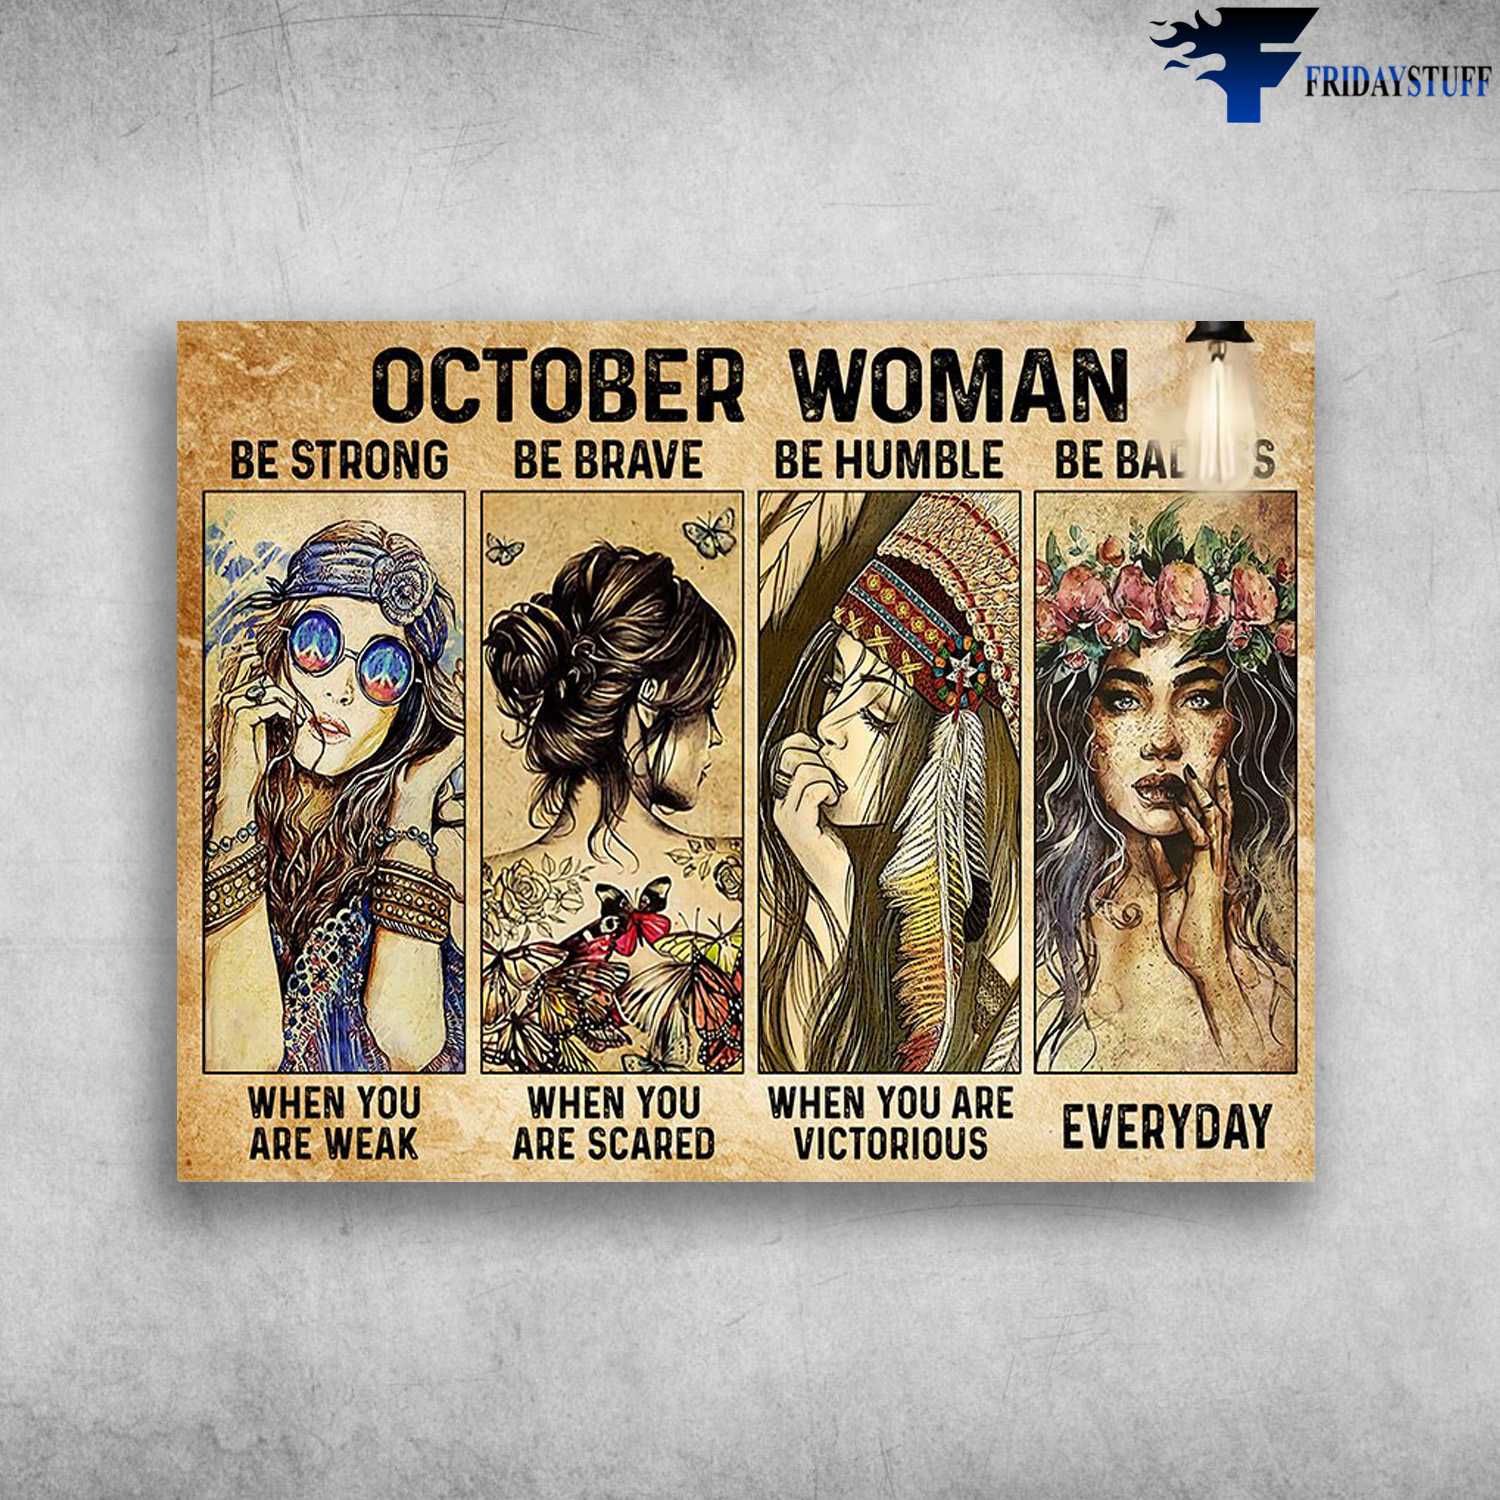 October Woman, Strong Girl, Be Strong When You Are Weak, Be Brave When You Are Scared, Be Humble When You Are Victorious, Be Badass Everyday